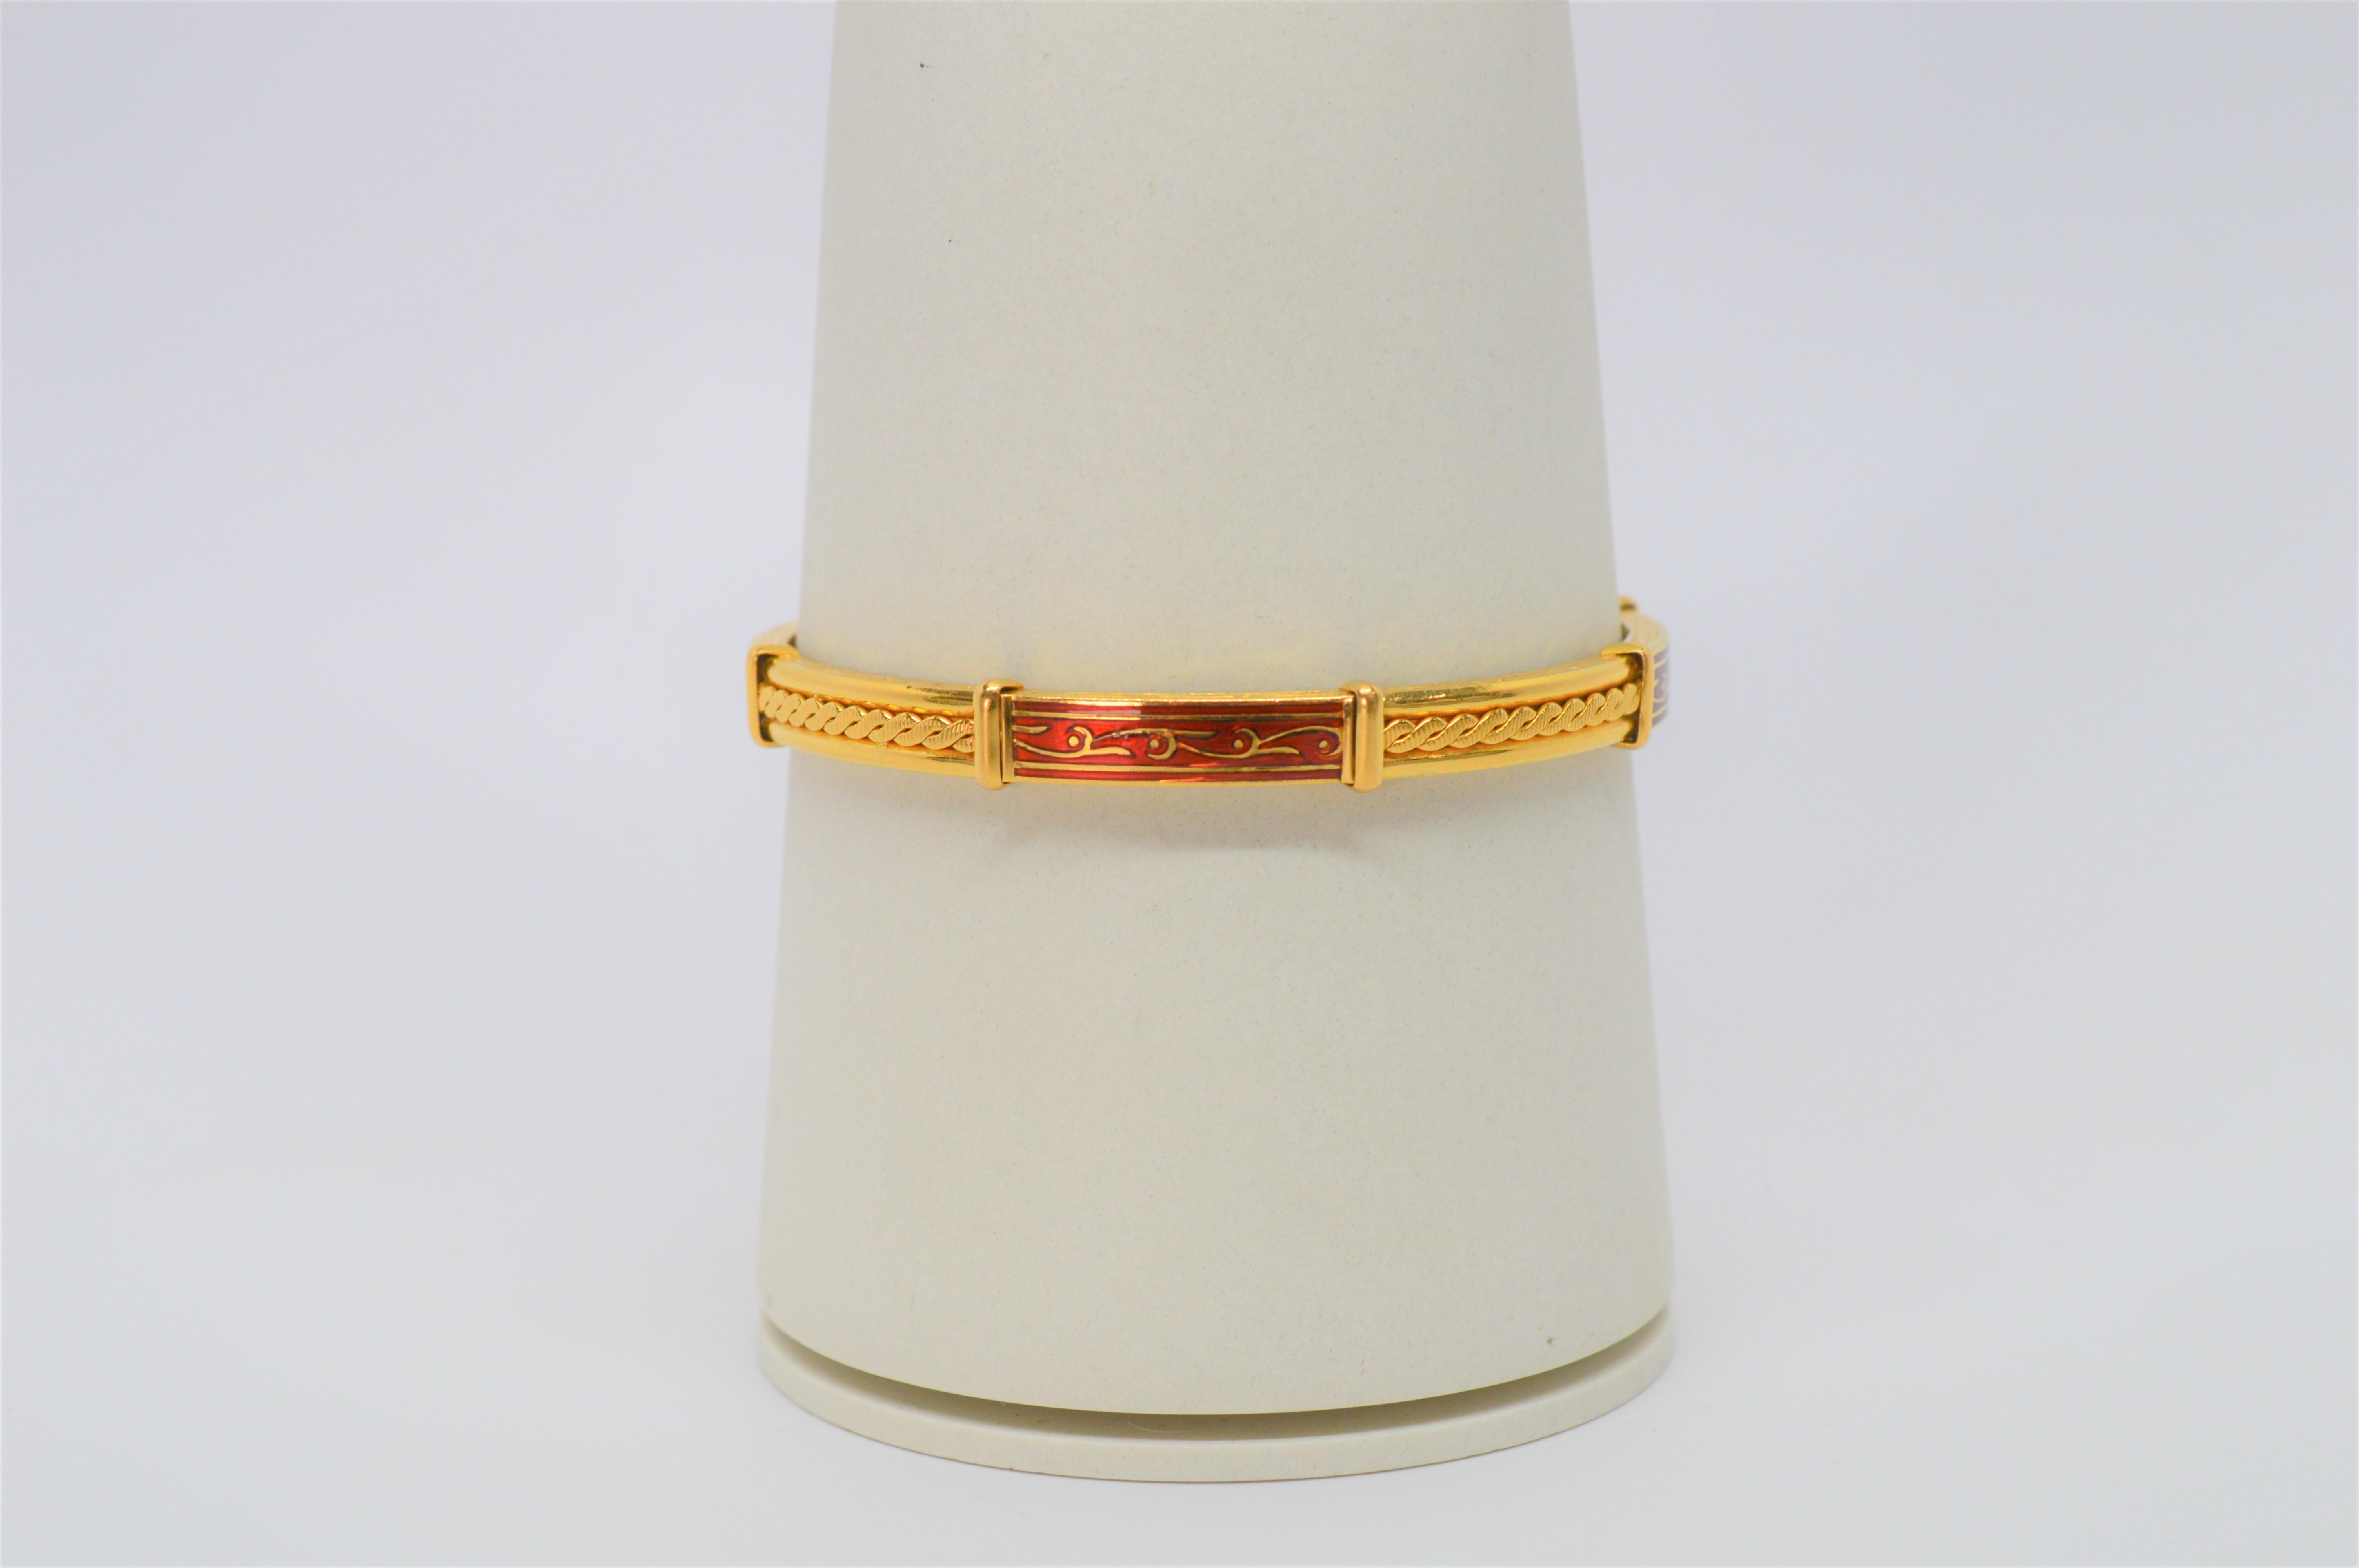 20 Karat Yellow Gold Red Enamel Bangle Bracelet In Excellent Condition For Sale In Mount Kisco, NY